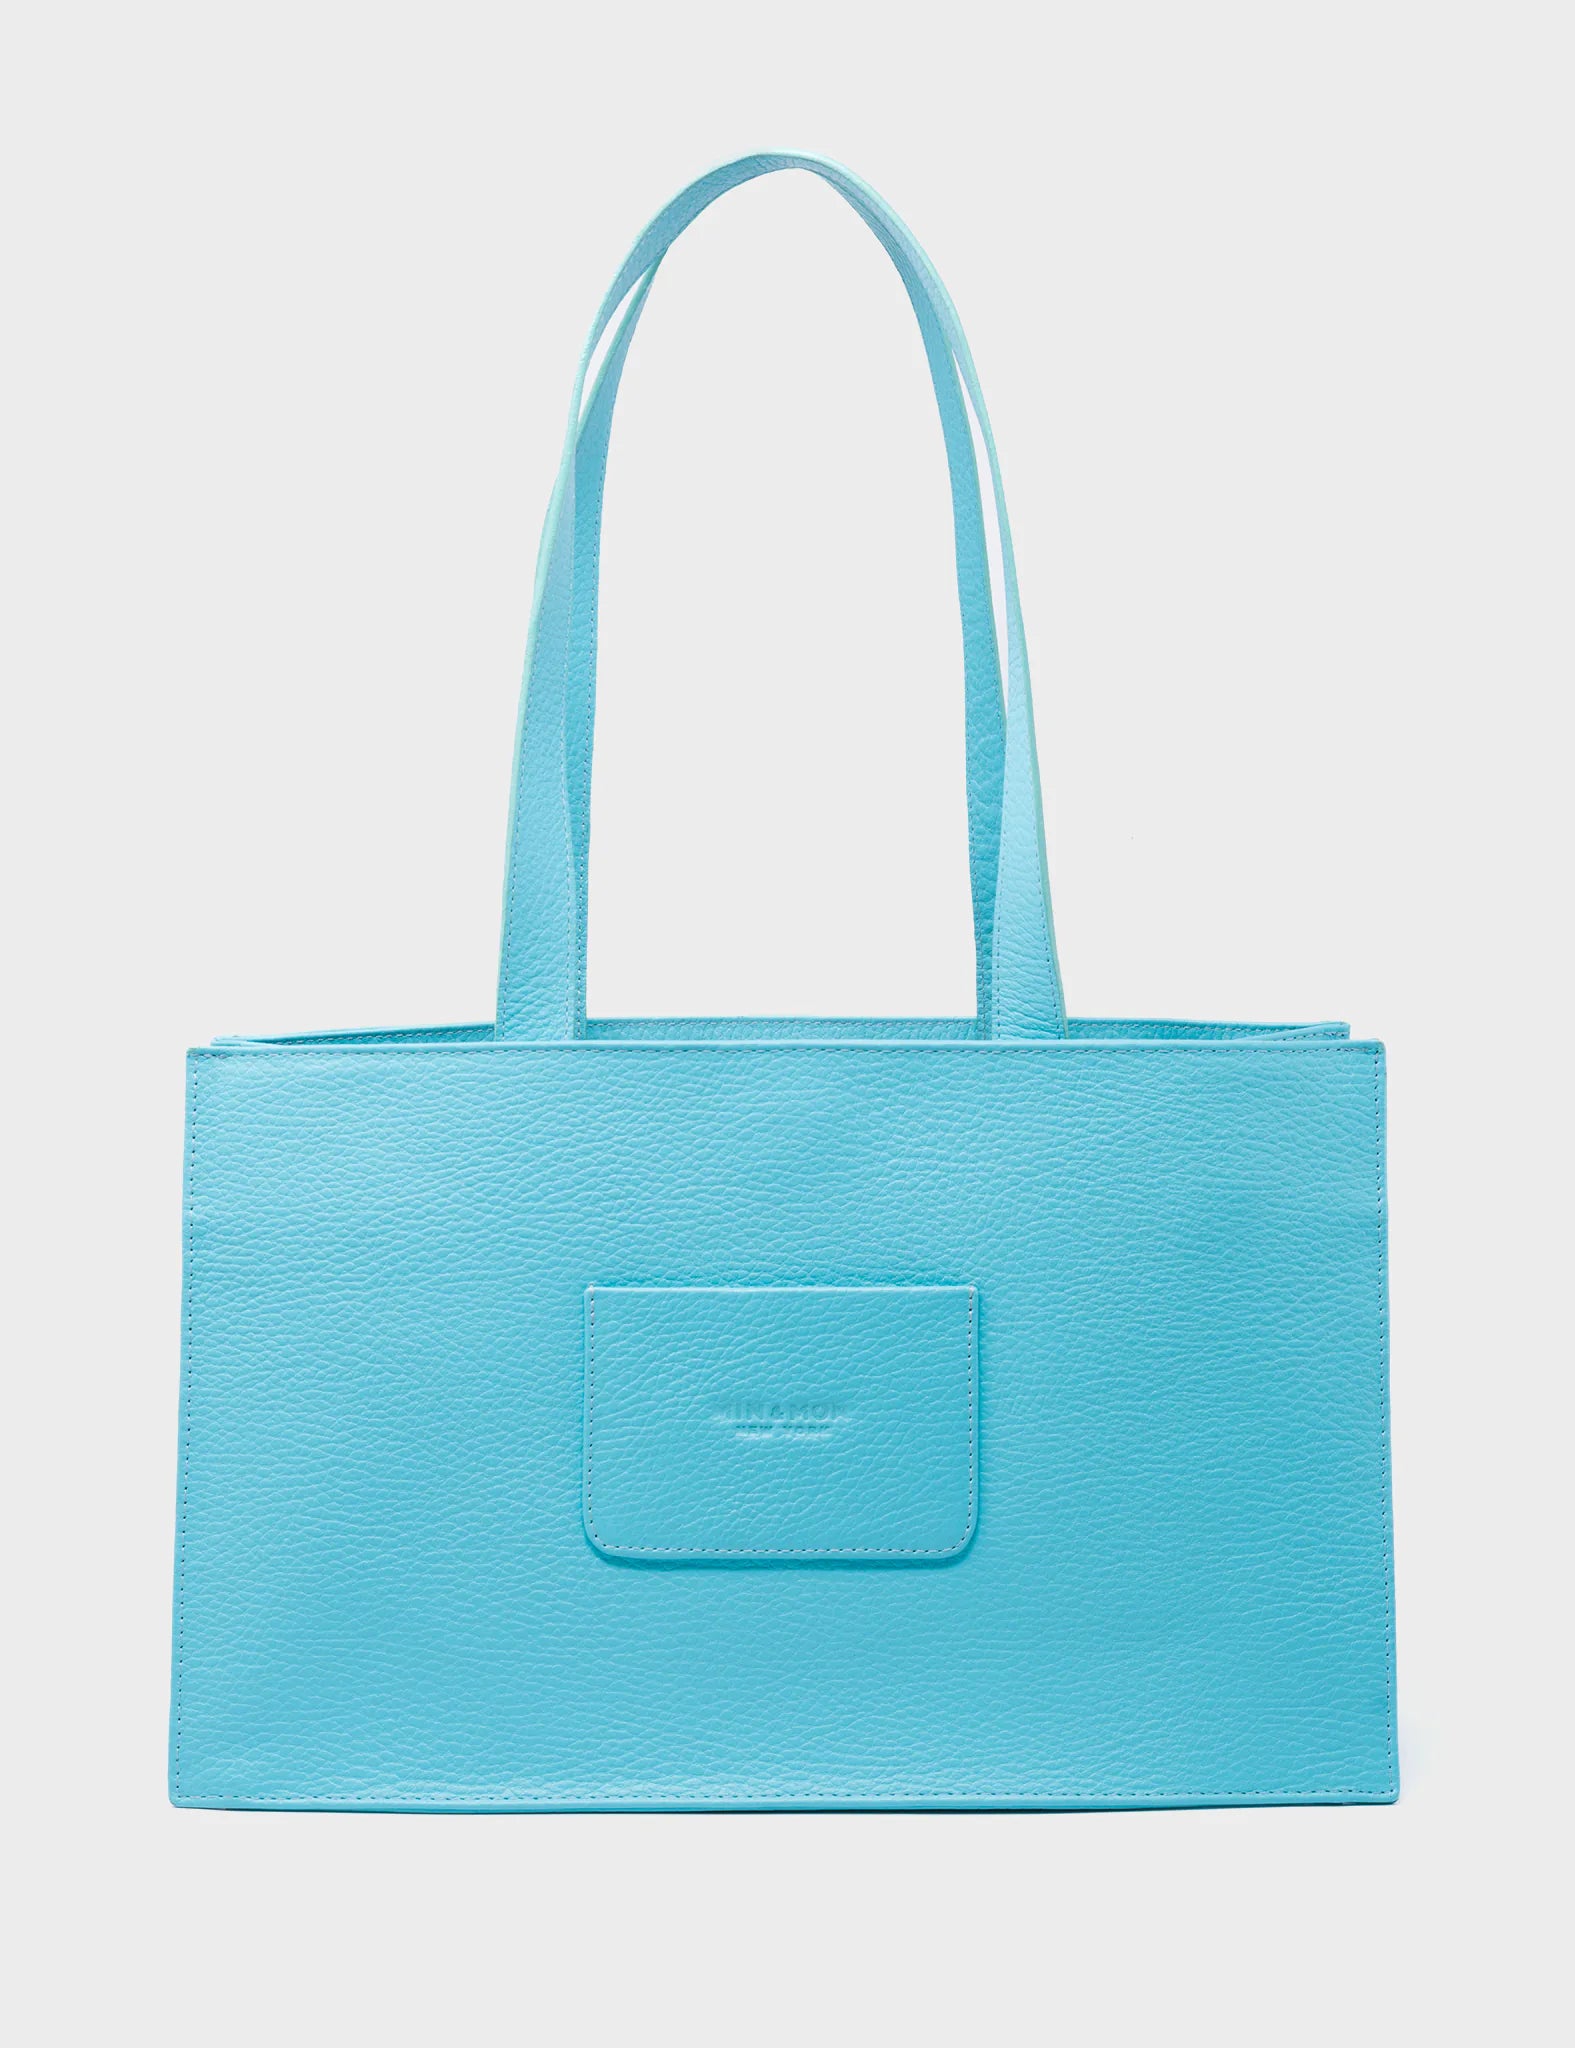 Marko Small Cyan Leather Tote Bag - Urban Doodles Applique - Back view